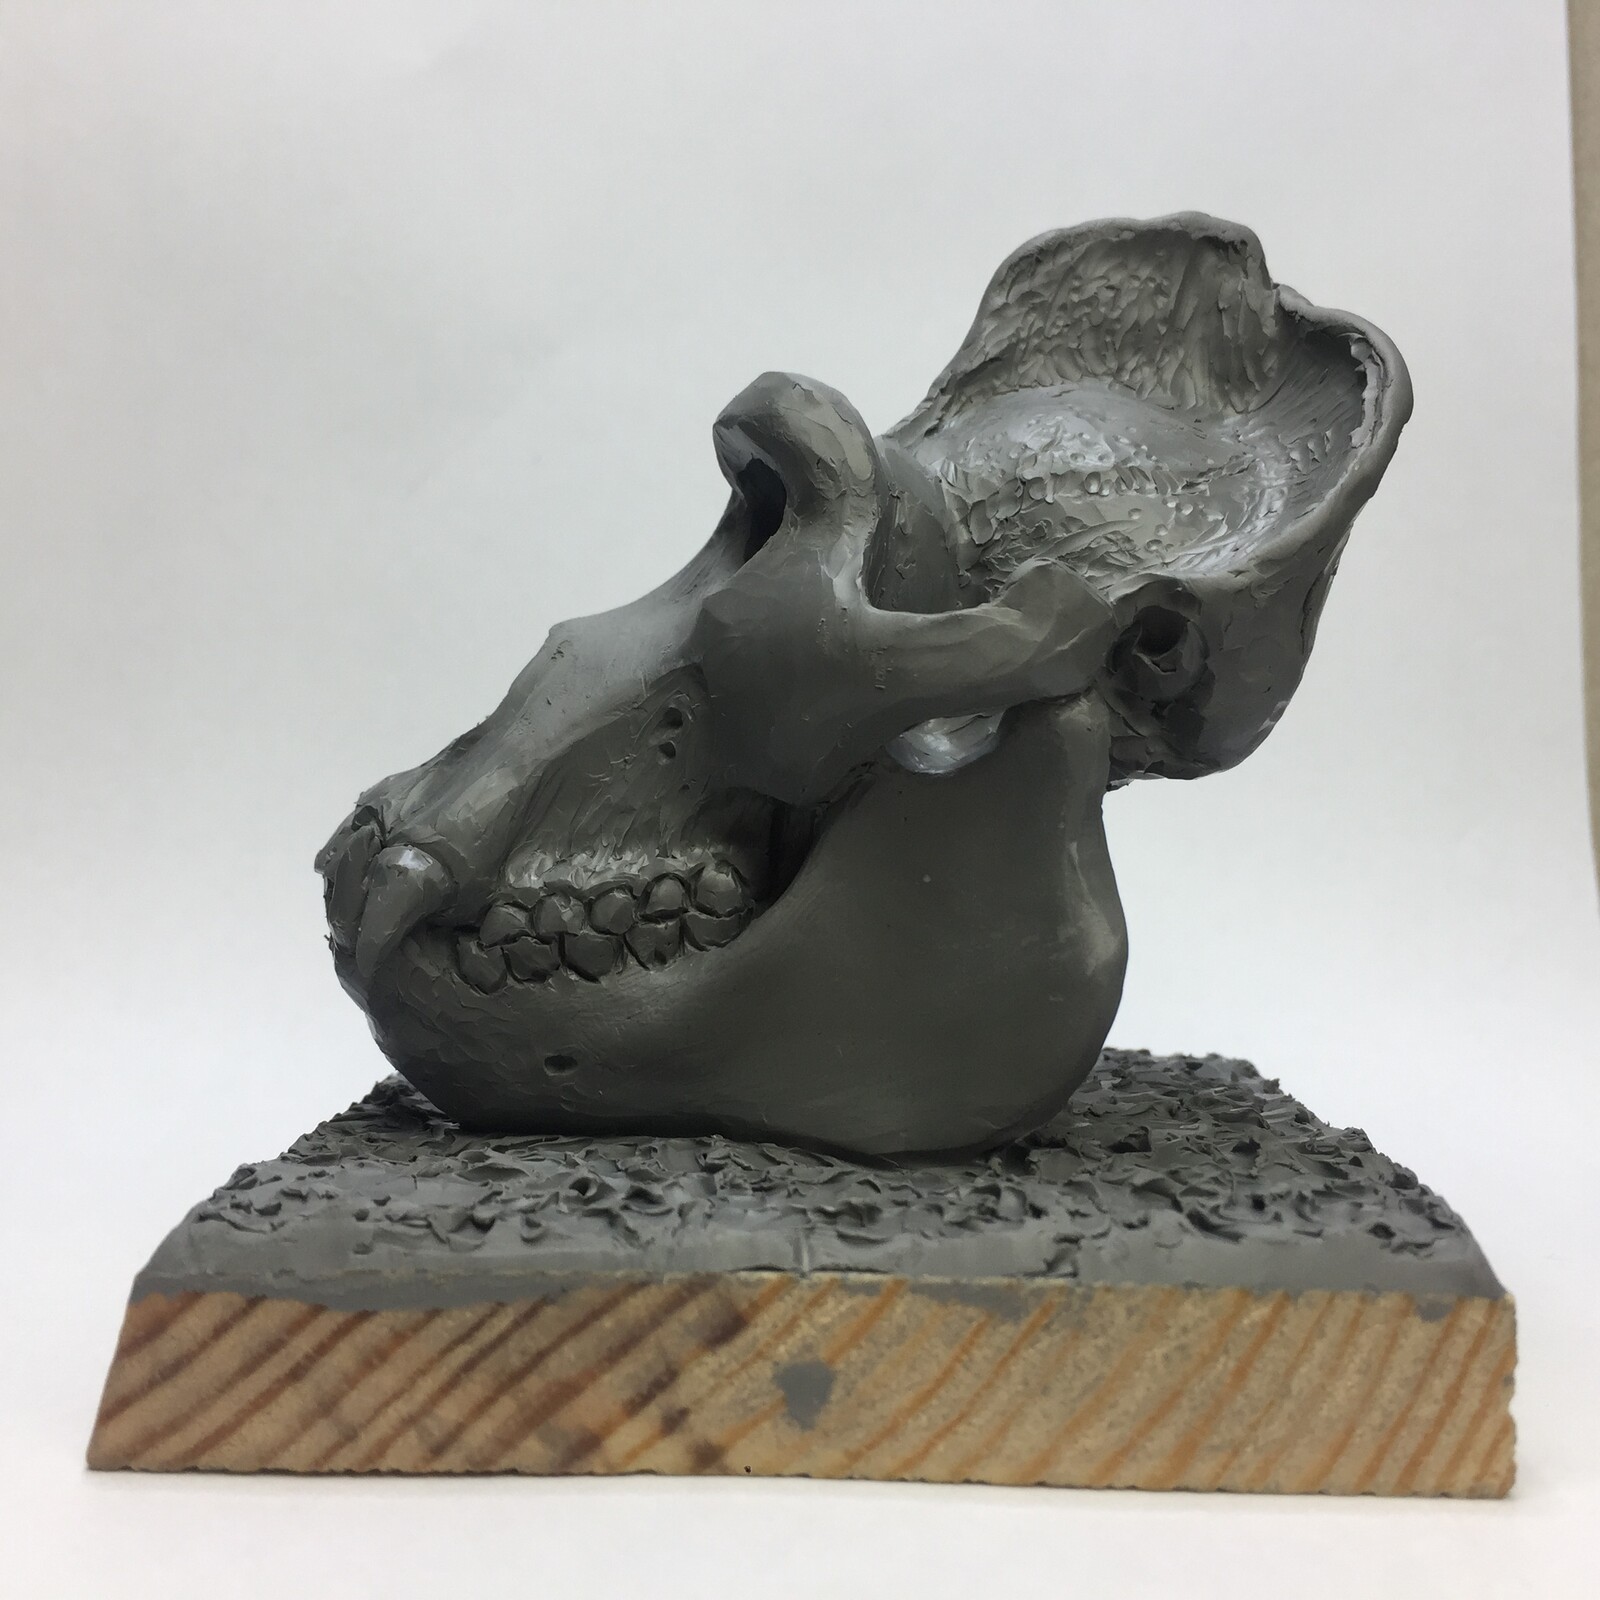  Just for fun and practicing knowledge about the gorilla skull. Would you like to have such a small part of the reference on your shelf?